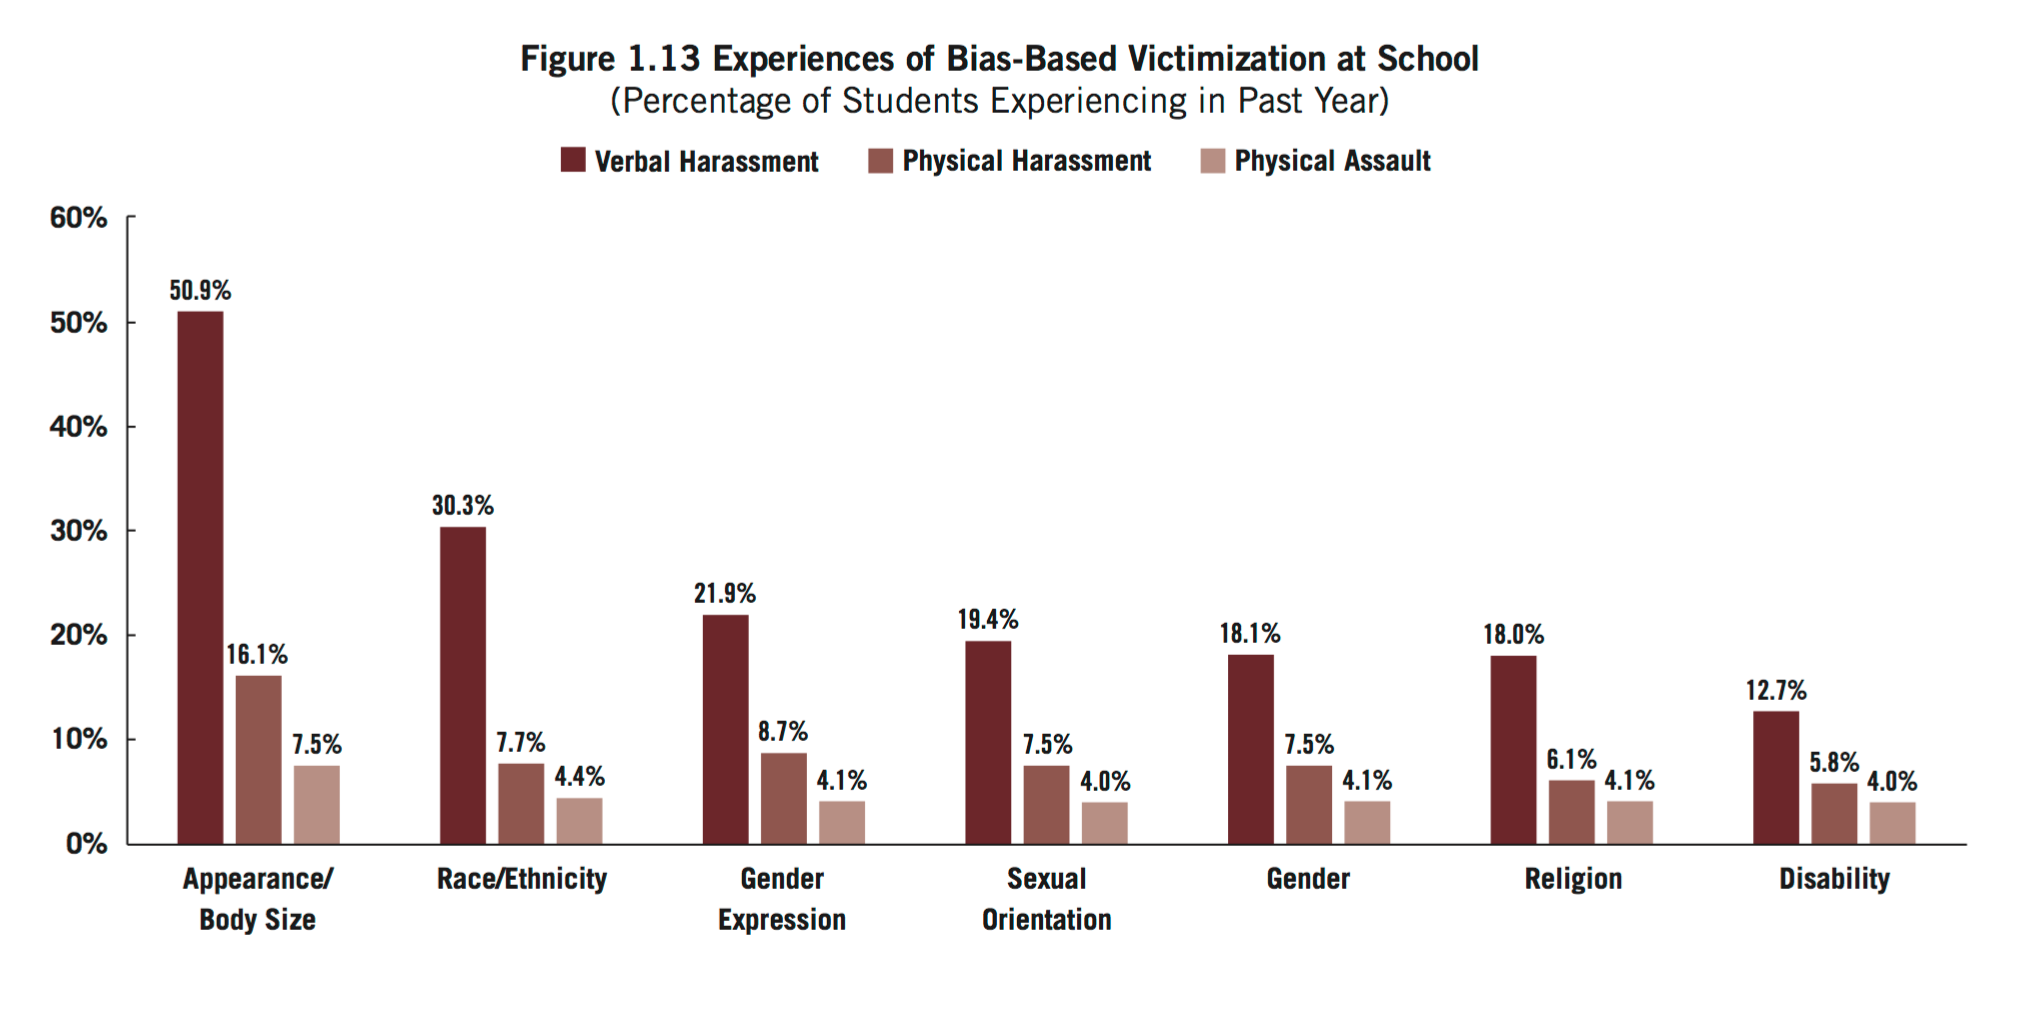 Experiences of Bias-Based Victimization at School